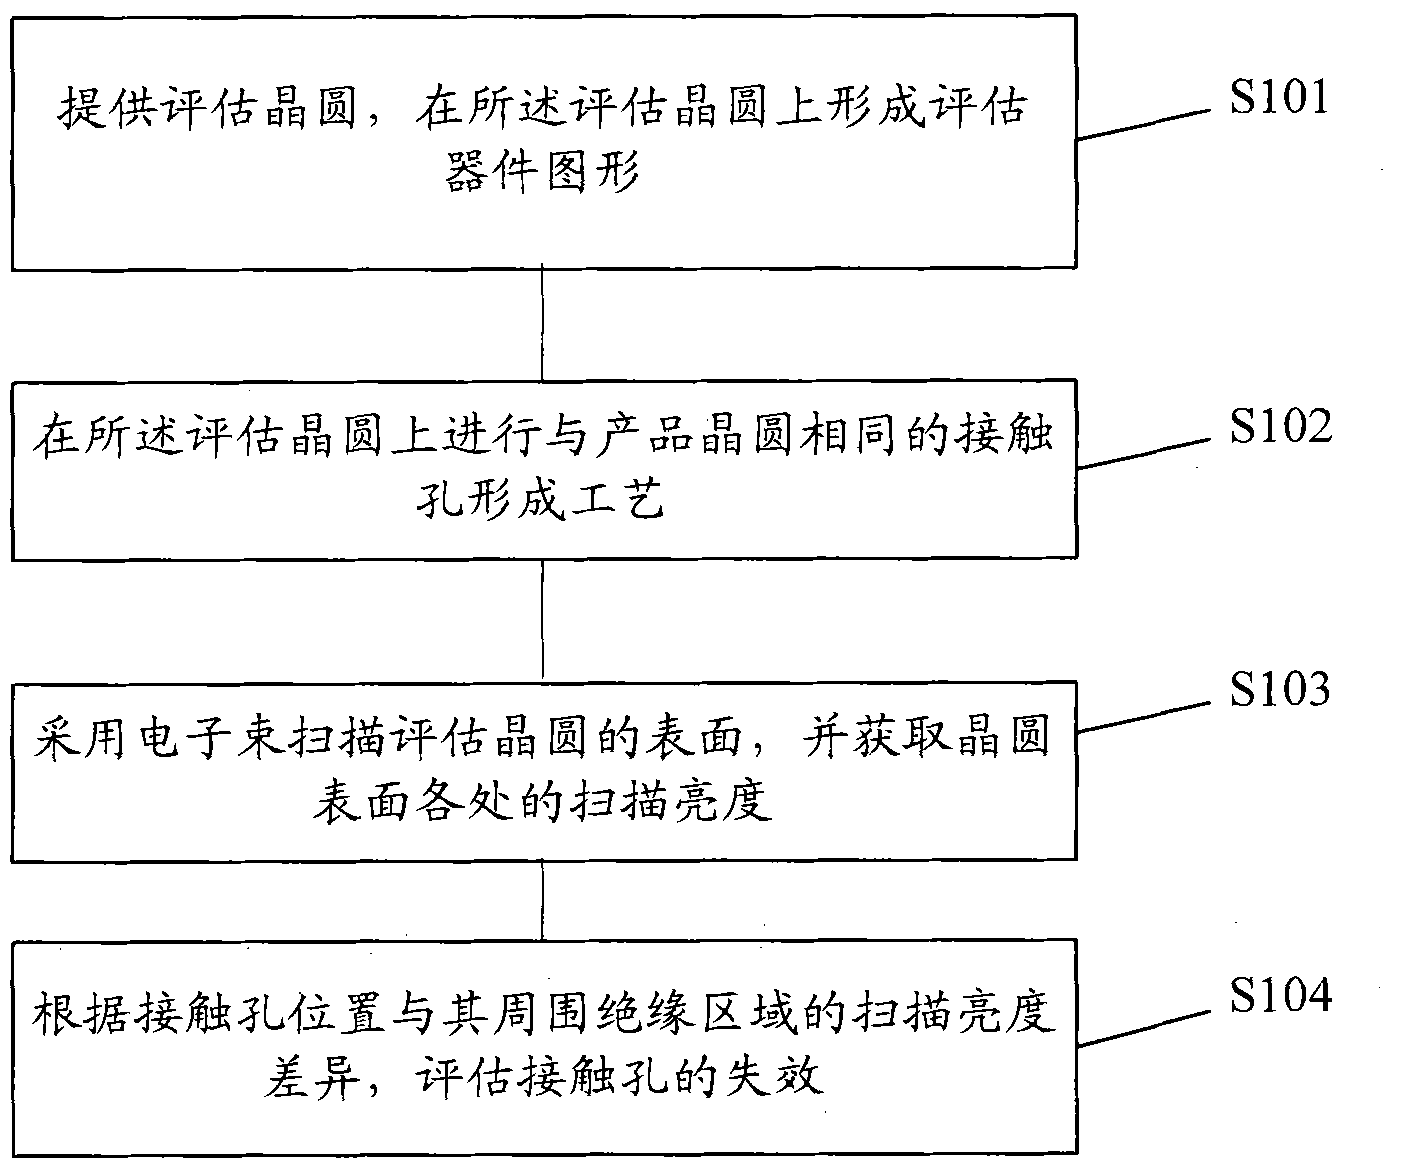 Evaluation method for failure of contact hole